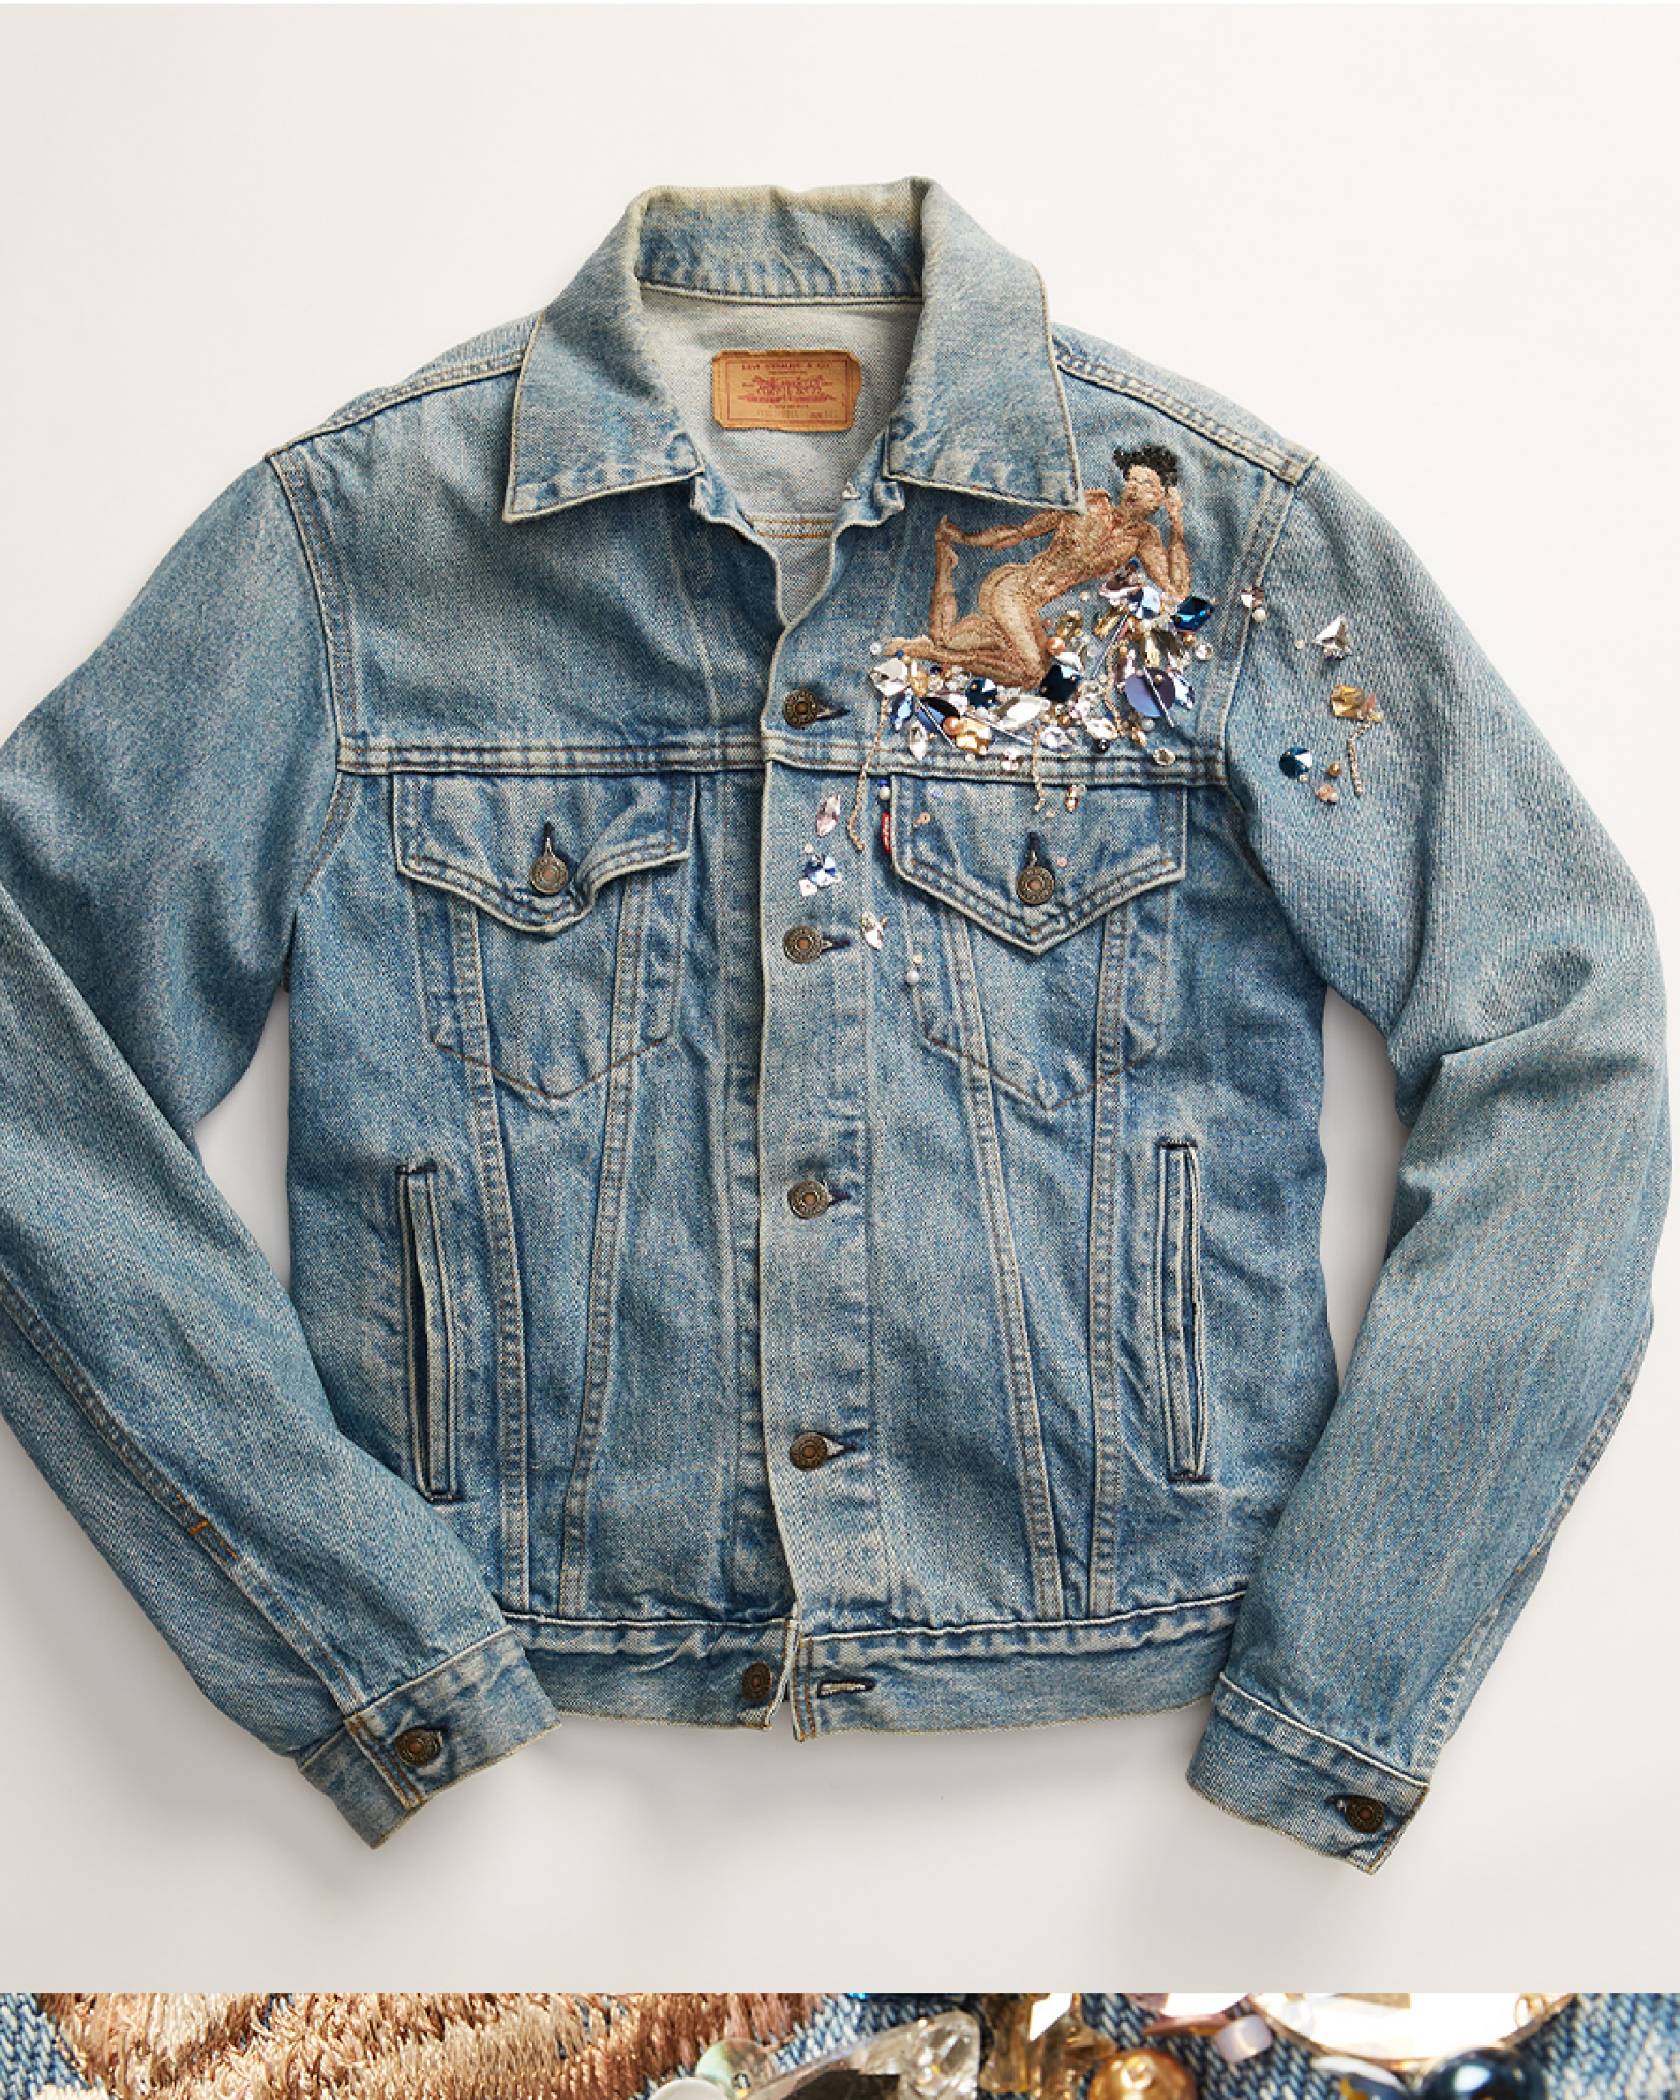 Laydown image of a light wash trucker jacket embroidered with a person sitting on top of a bed of jewels on the upper left side of the front of the jacket, above the trucker jacket's pocket.